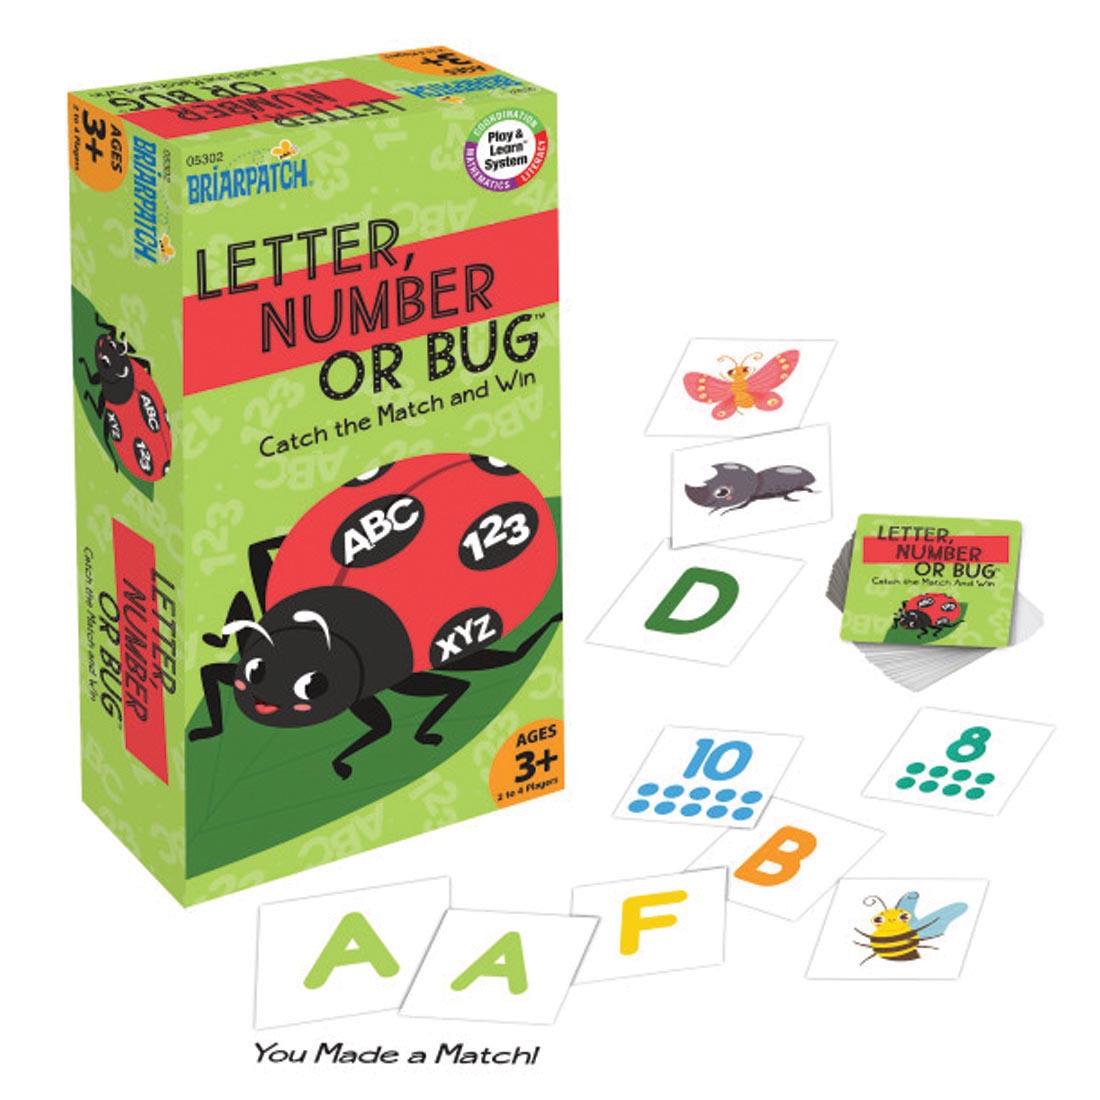 Letter, Number or Bug Game By Briarpatch